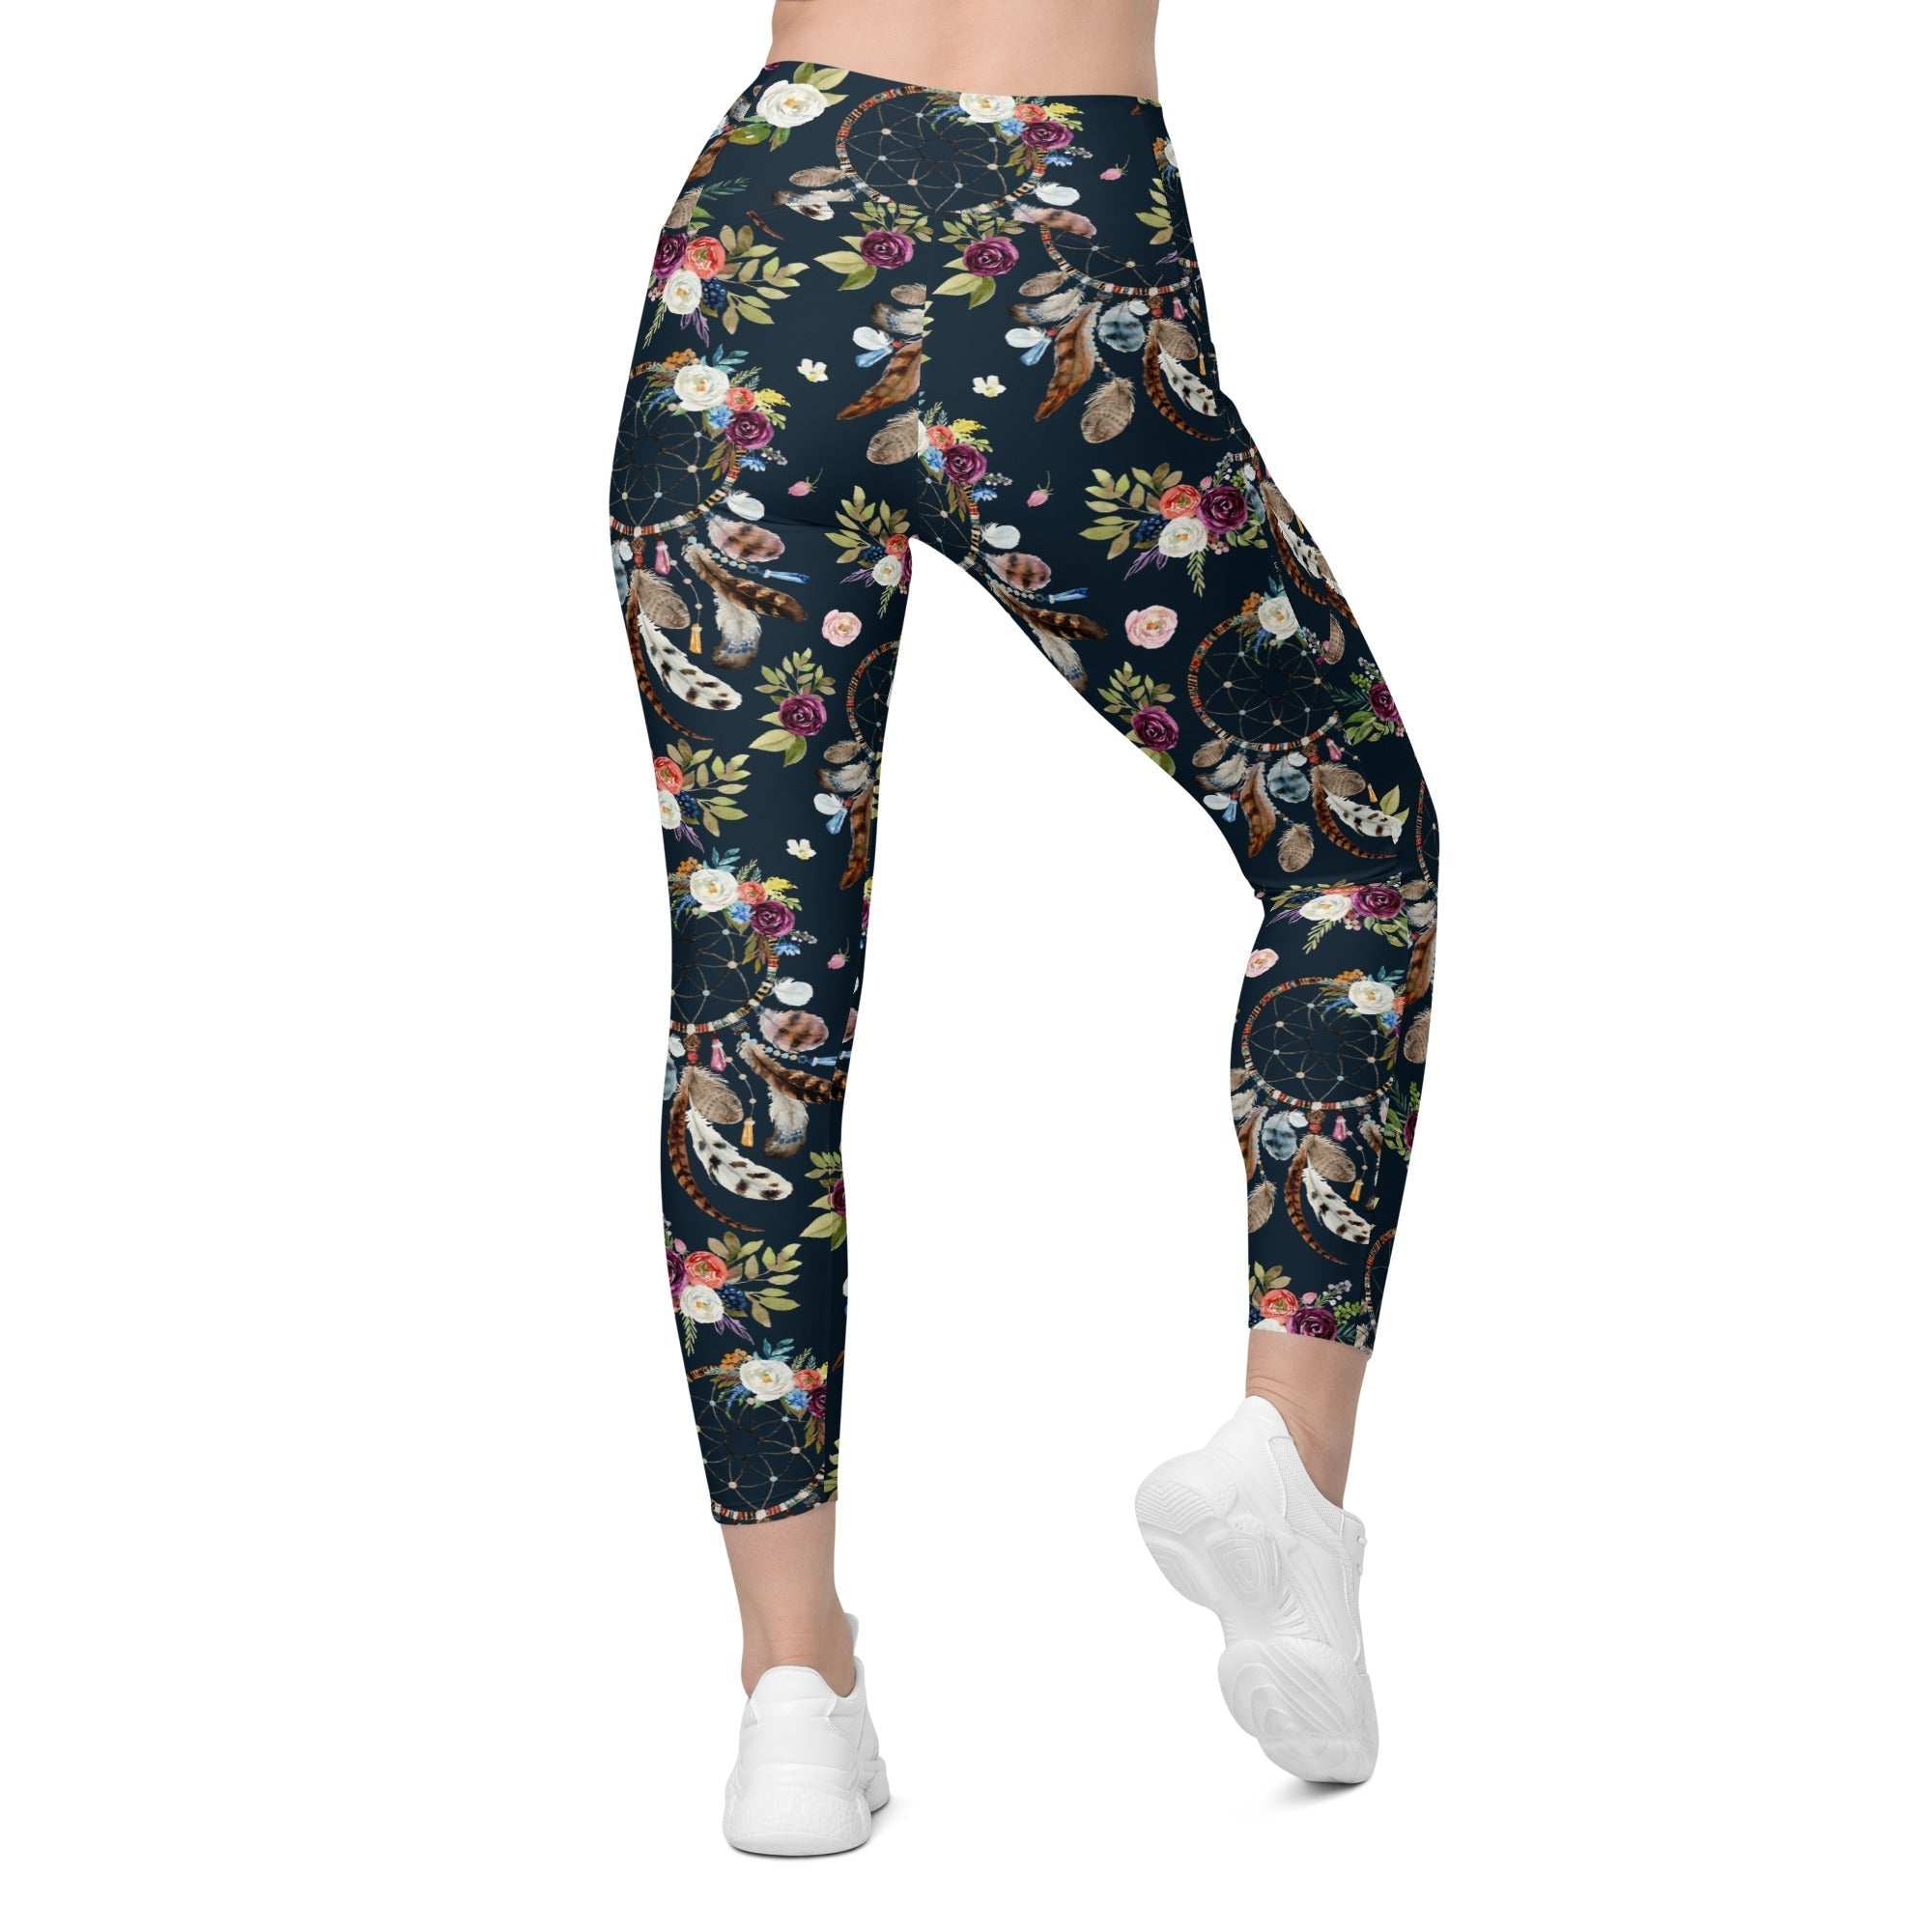 Dream Catcher Crossover Leggings With Pockets